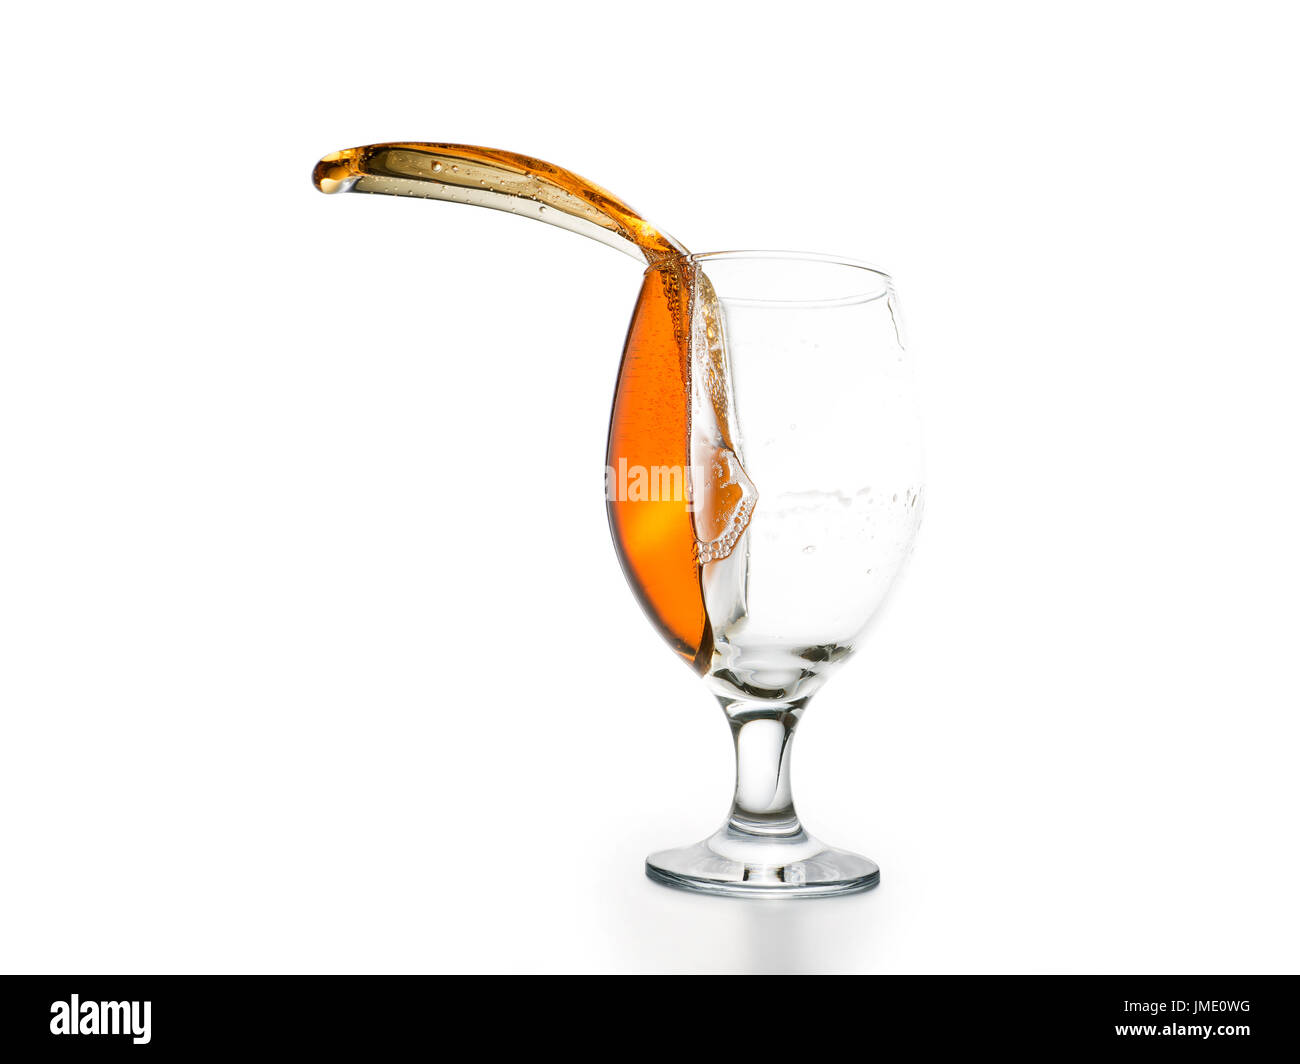 Download Splashing Golden Beer In The Glass Isolated In White Clipping Path Stock Photo 150284108 Alamy PSD Mockup Templates